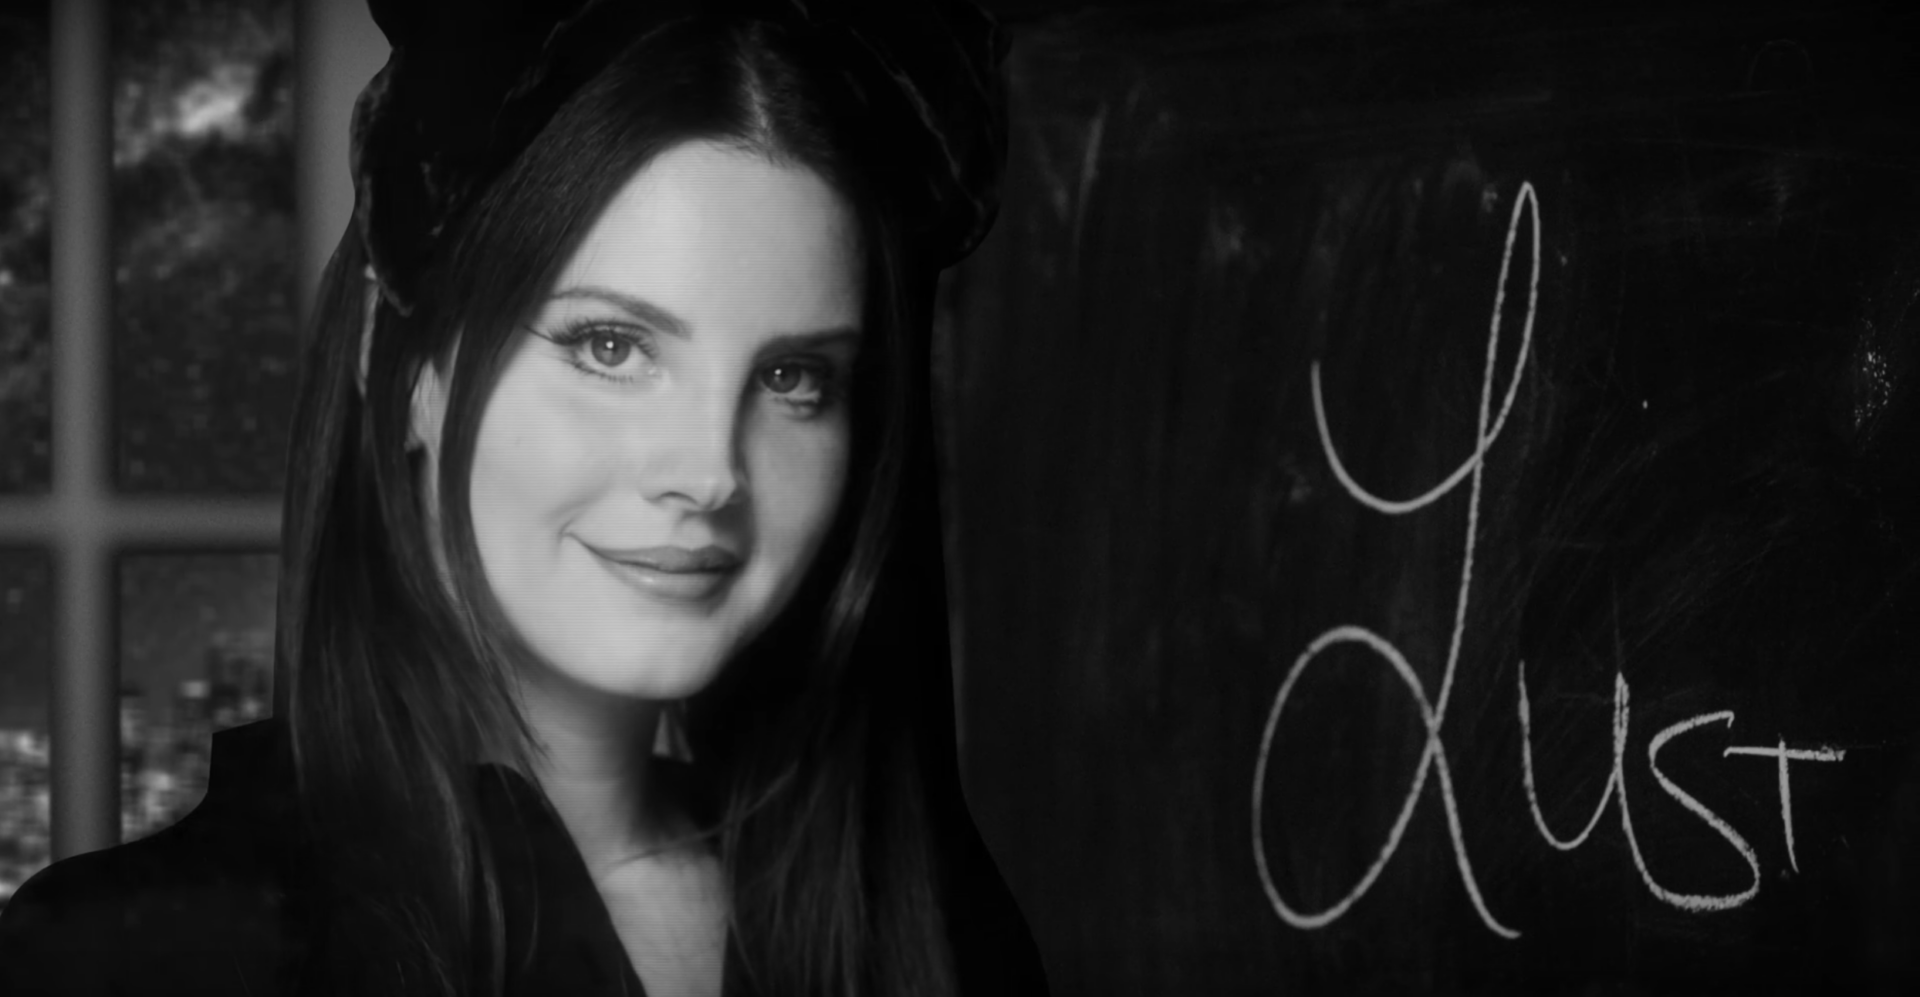 Lana Del Rey shares release date for ‘Lust For Life’